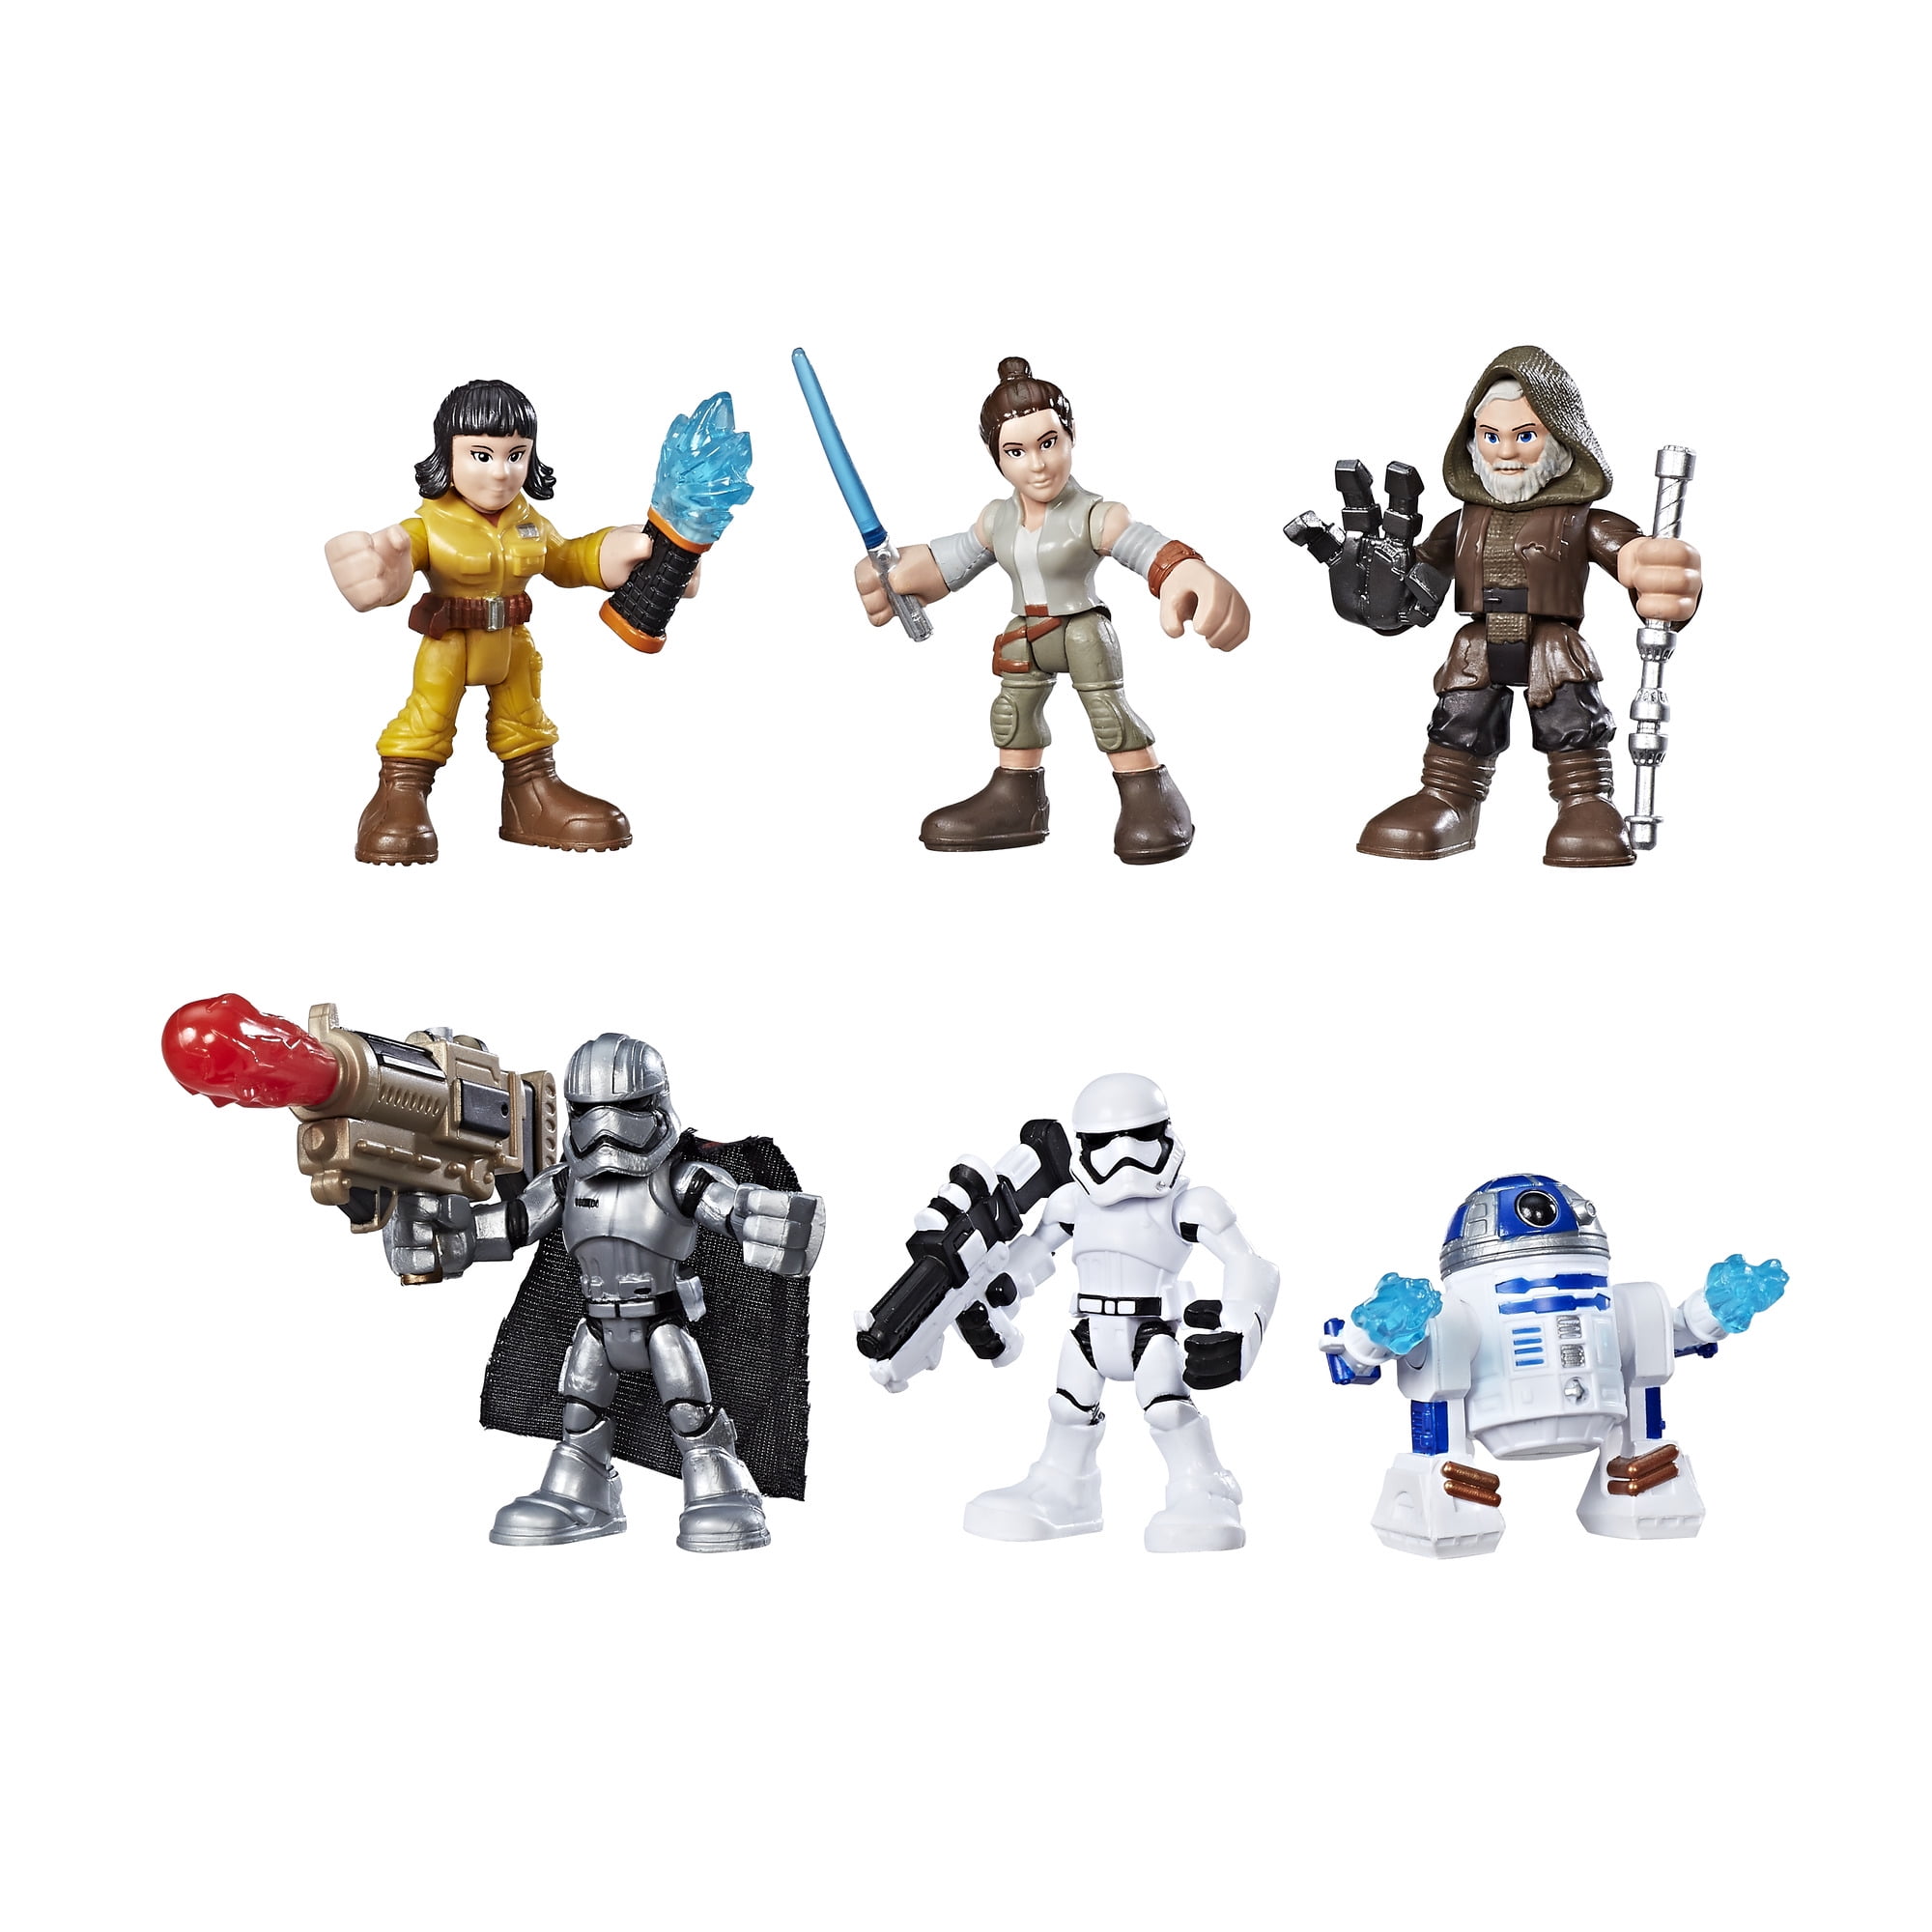 Star Wars Galactic Heroes Resistance VS. First Order Pack, for Ages 3-7 